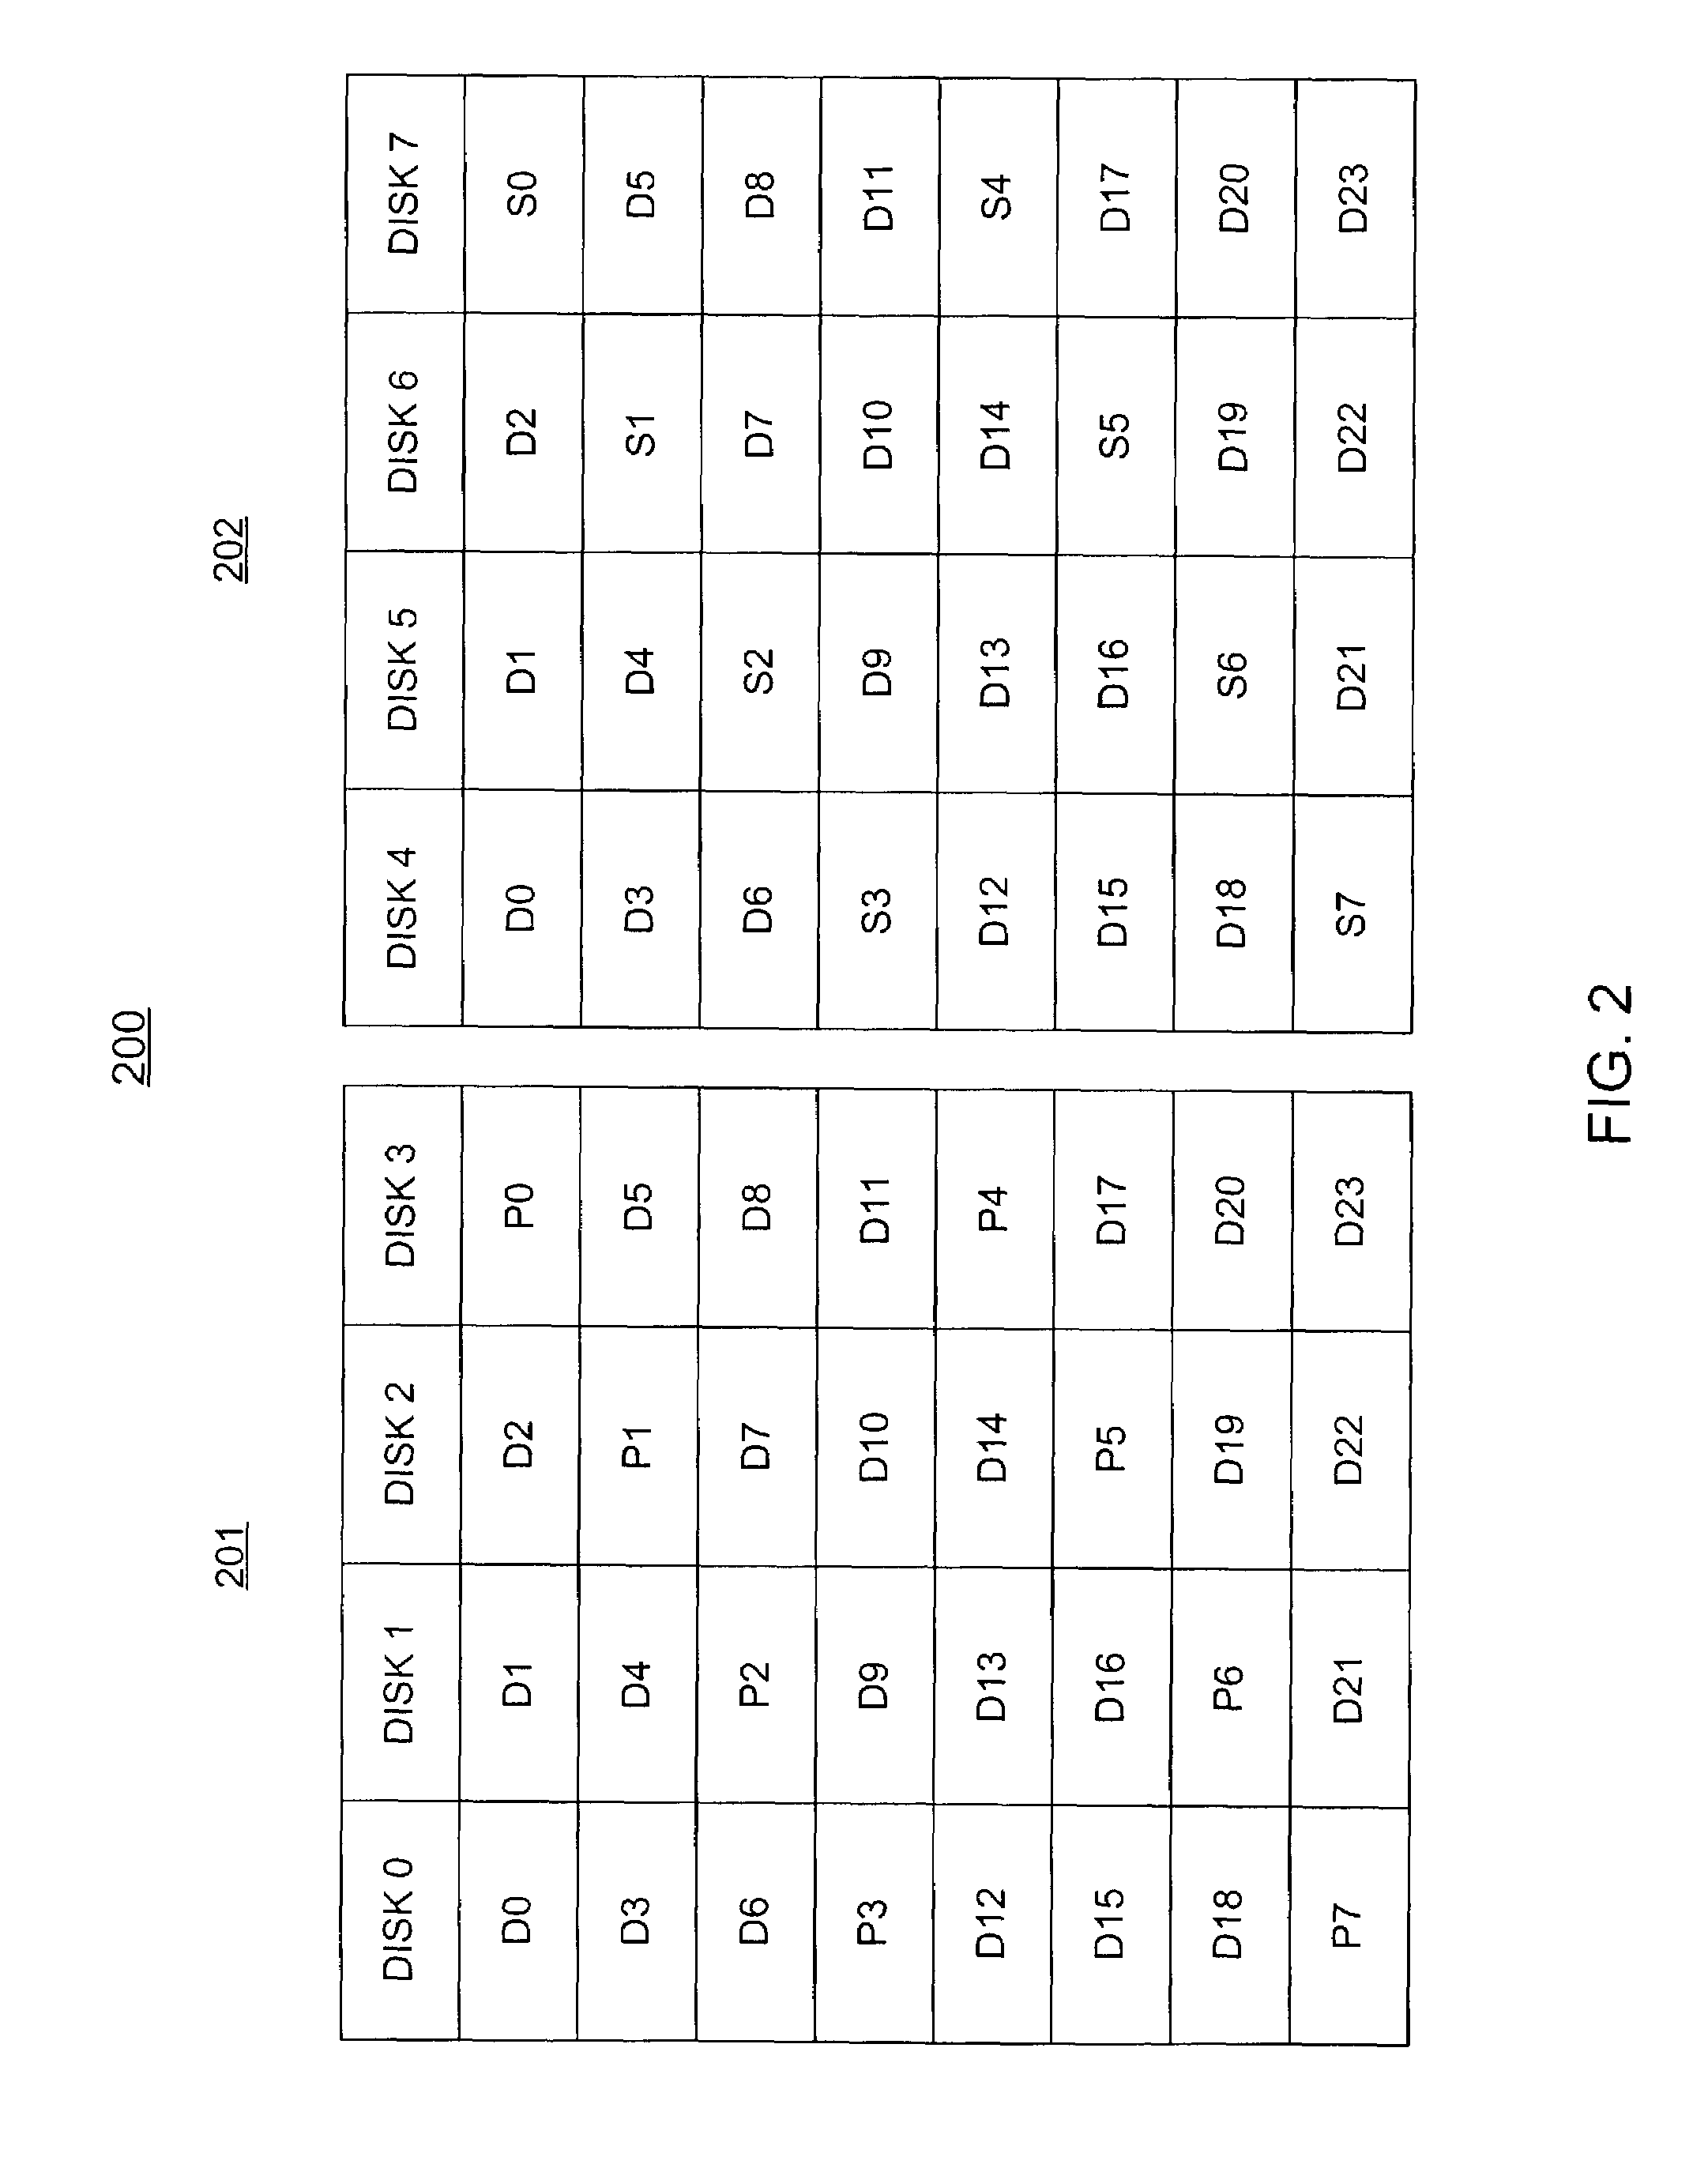 Method and means for tolerating multiple dependent or arbitrary double disk failures in a disk array